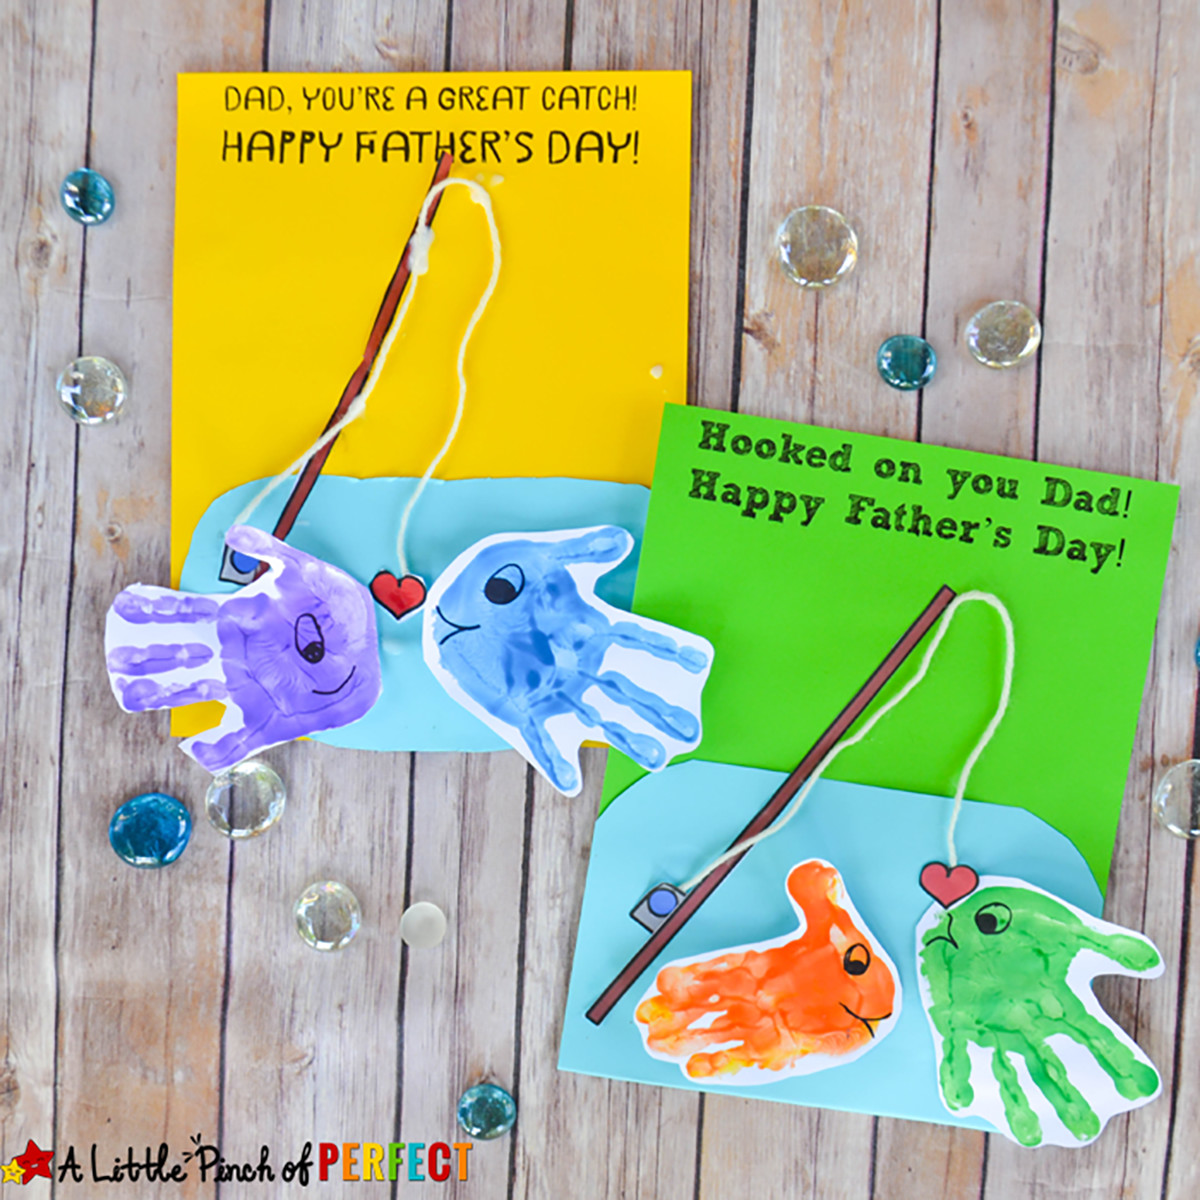 Fathers Day Crafts For Preschool
 DIY Preschool Father s Day Gifts Your Little es Will